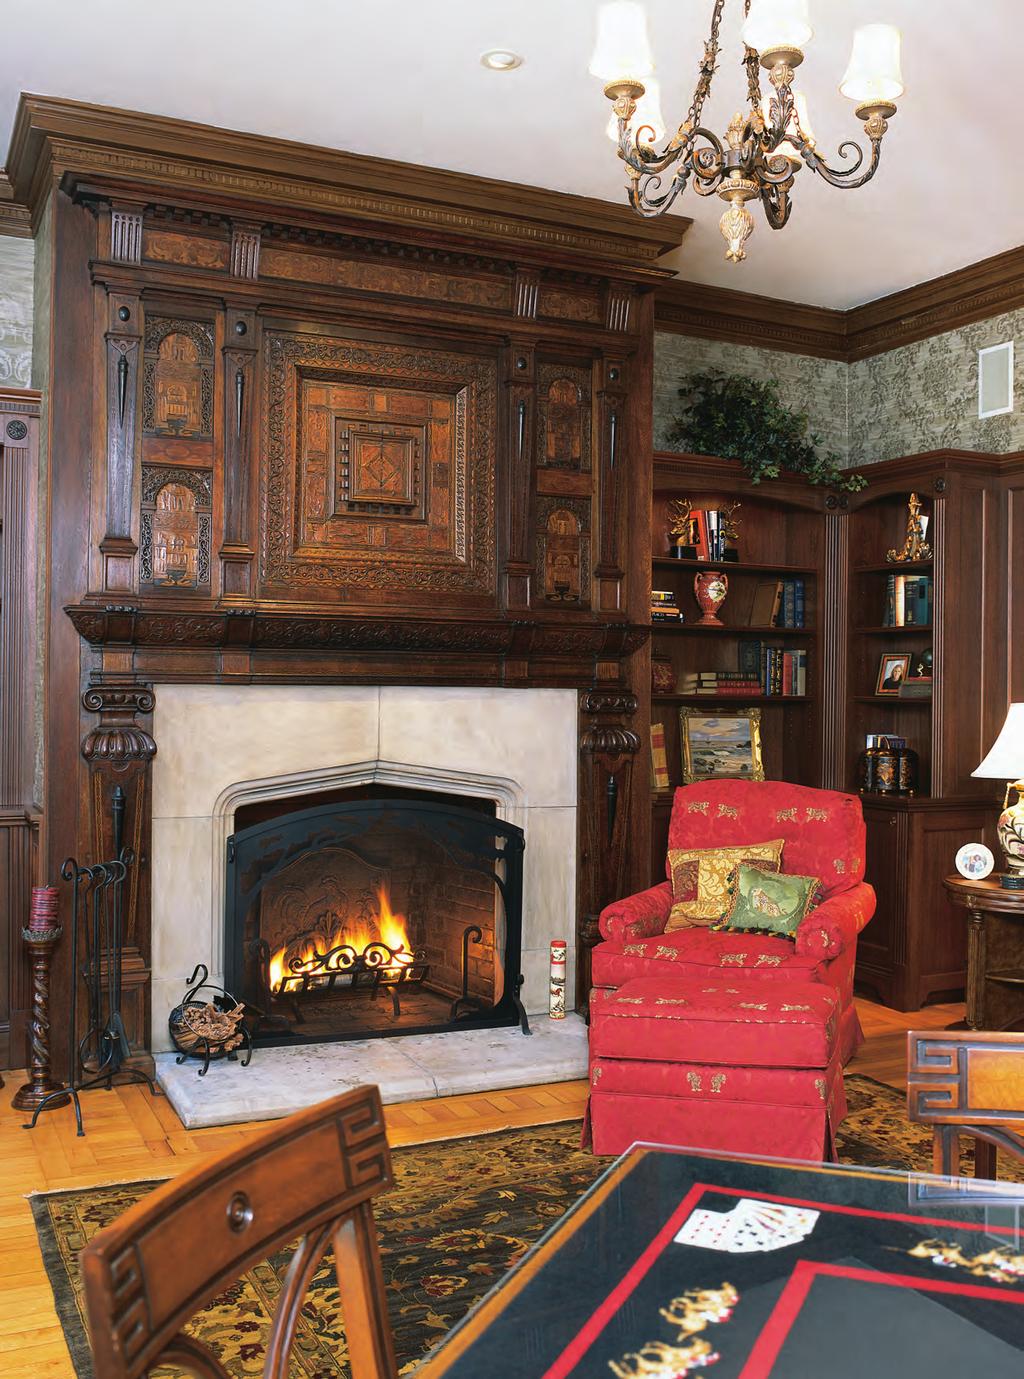 WARM AND RICH An ornate mantel of inlaid chestnut and ebony wood looks over a tobacco-colored leather sofa and